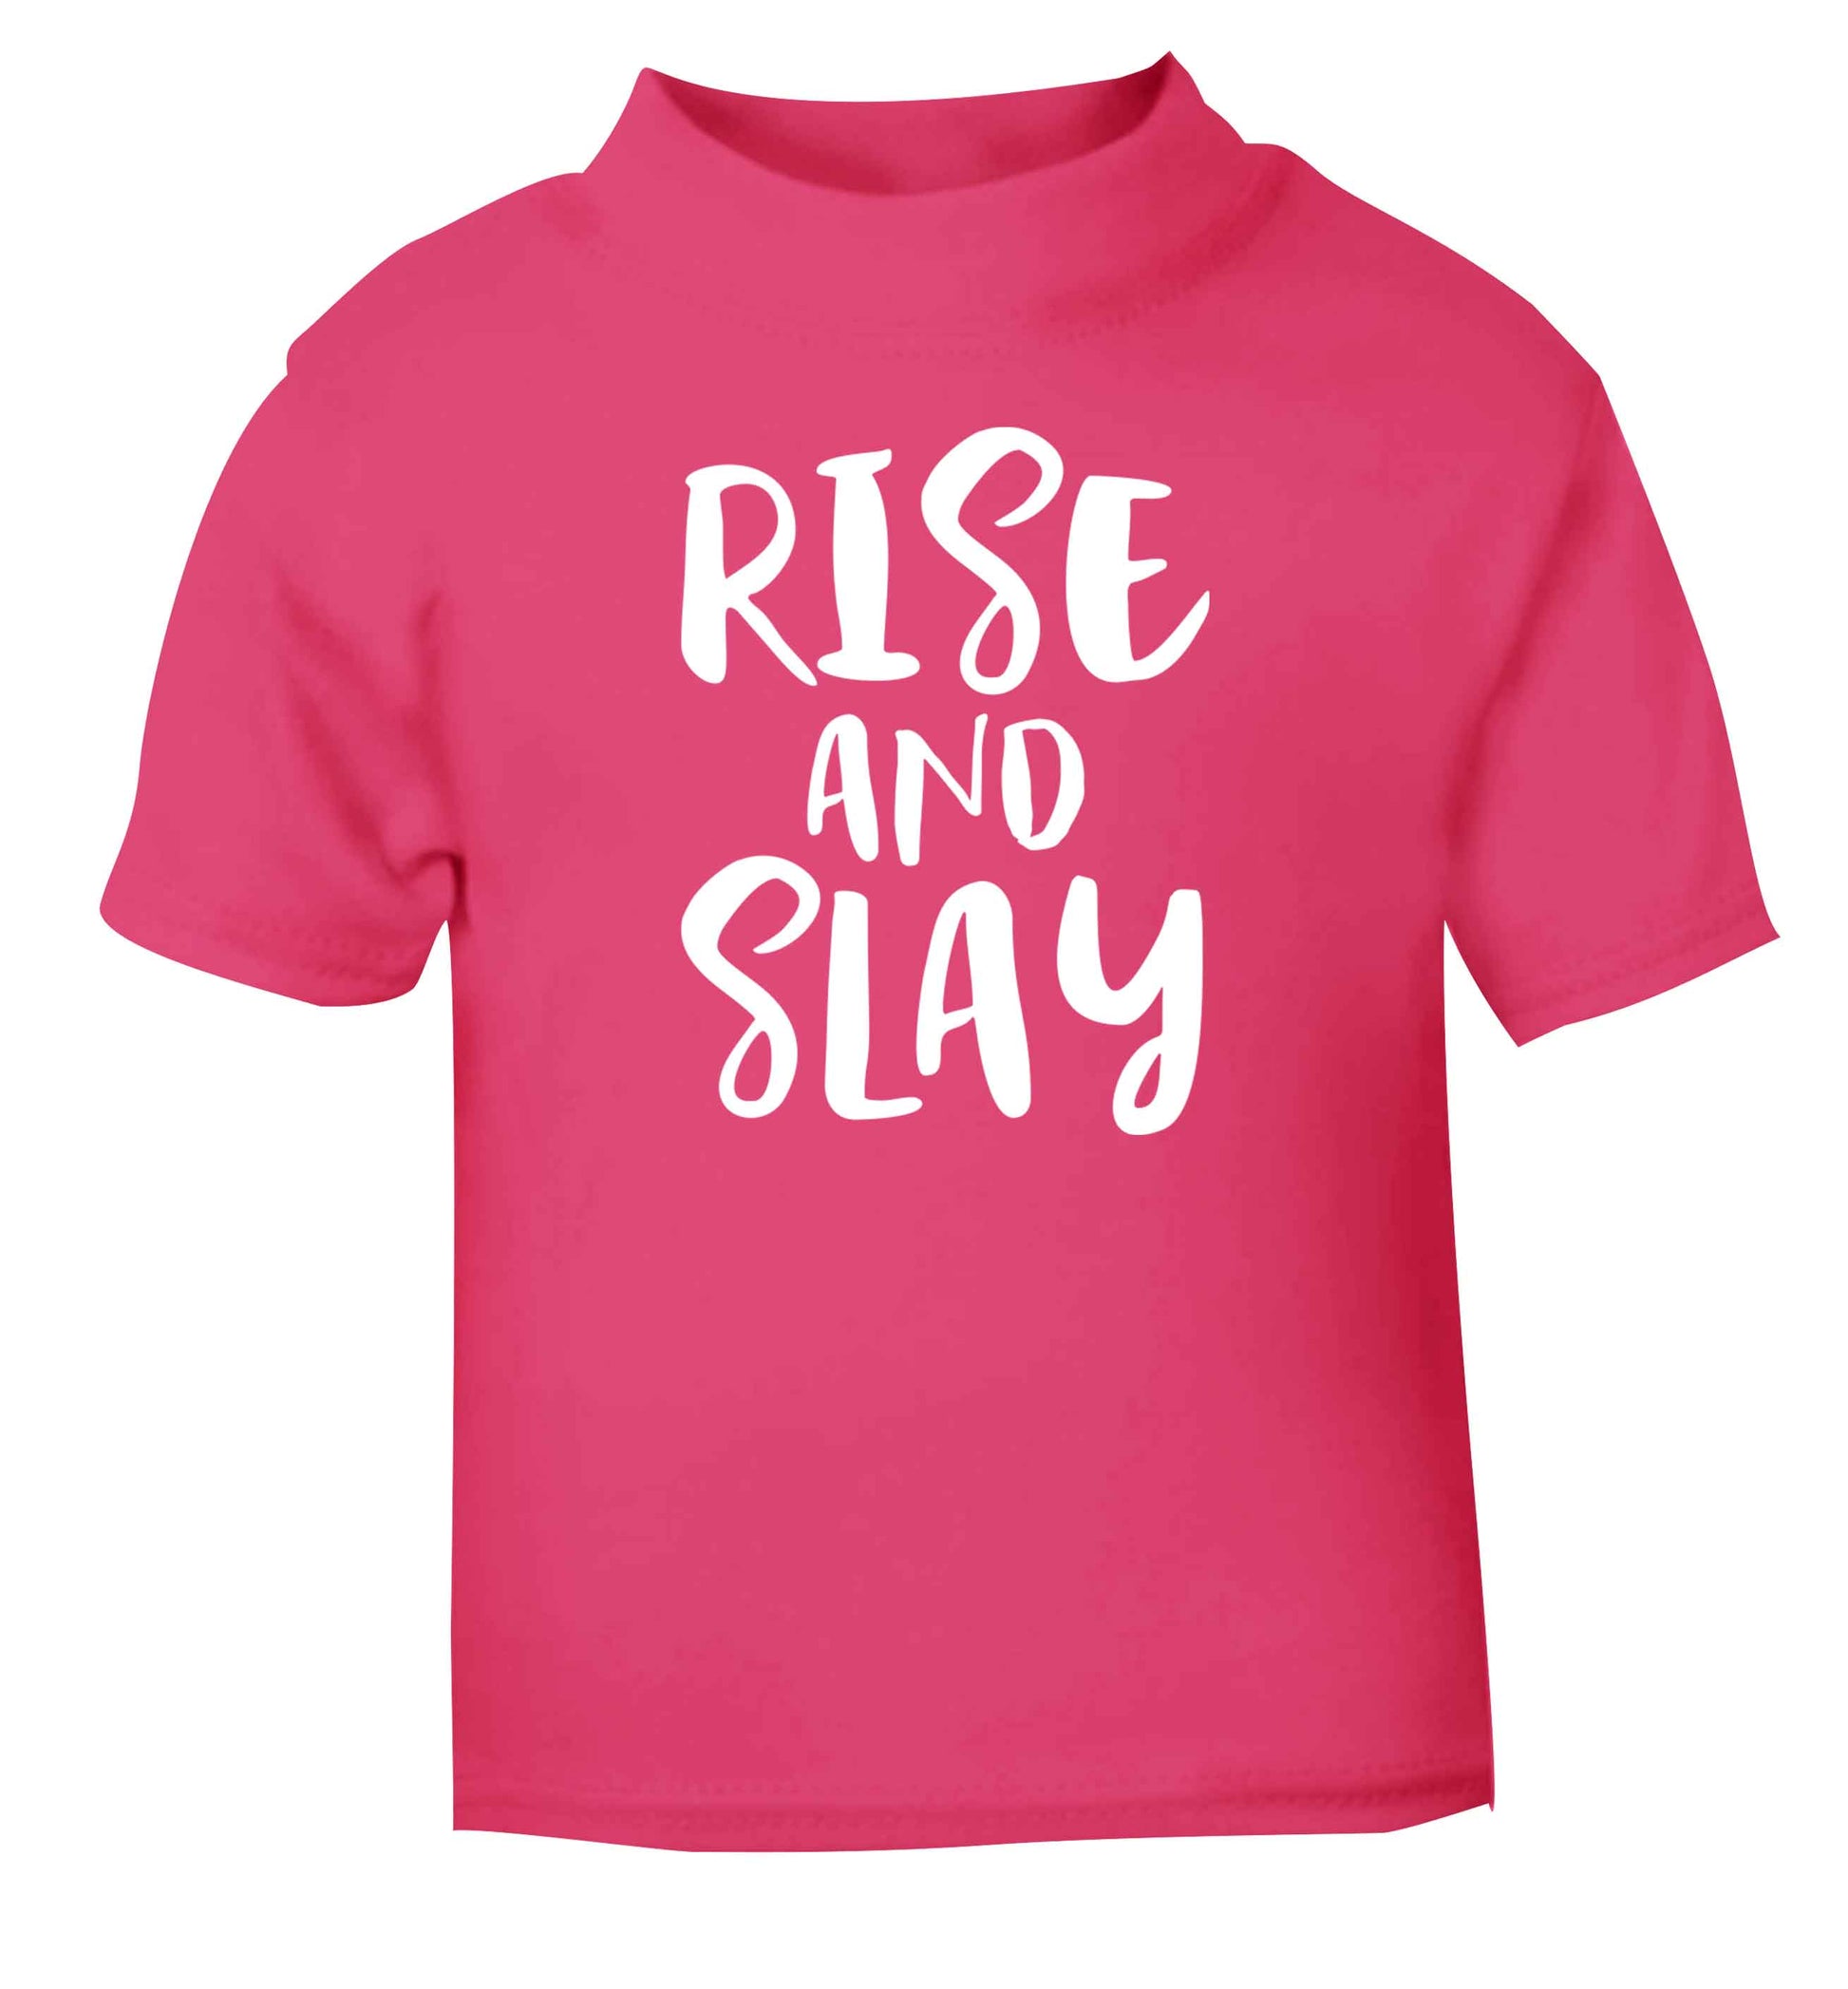 Rise and slay pink Baby Toddler Tshirt 2 Years